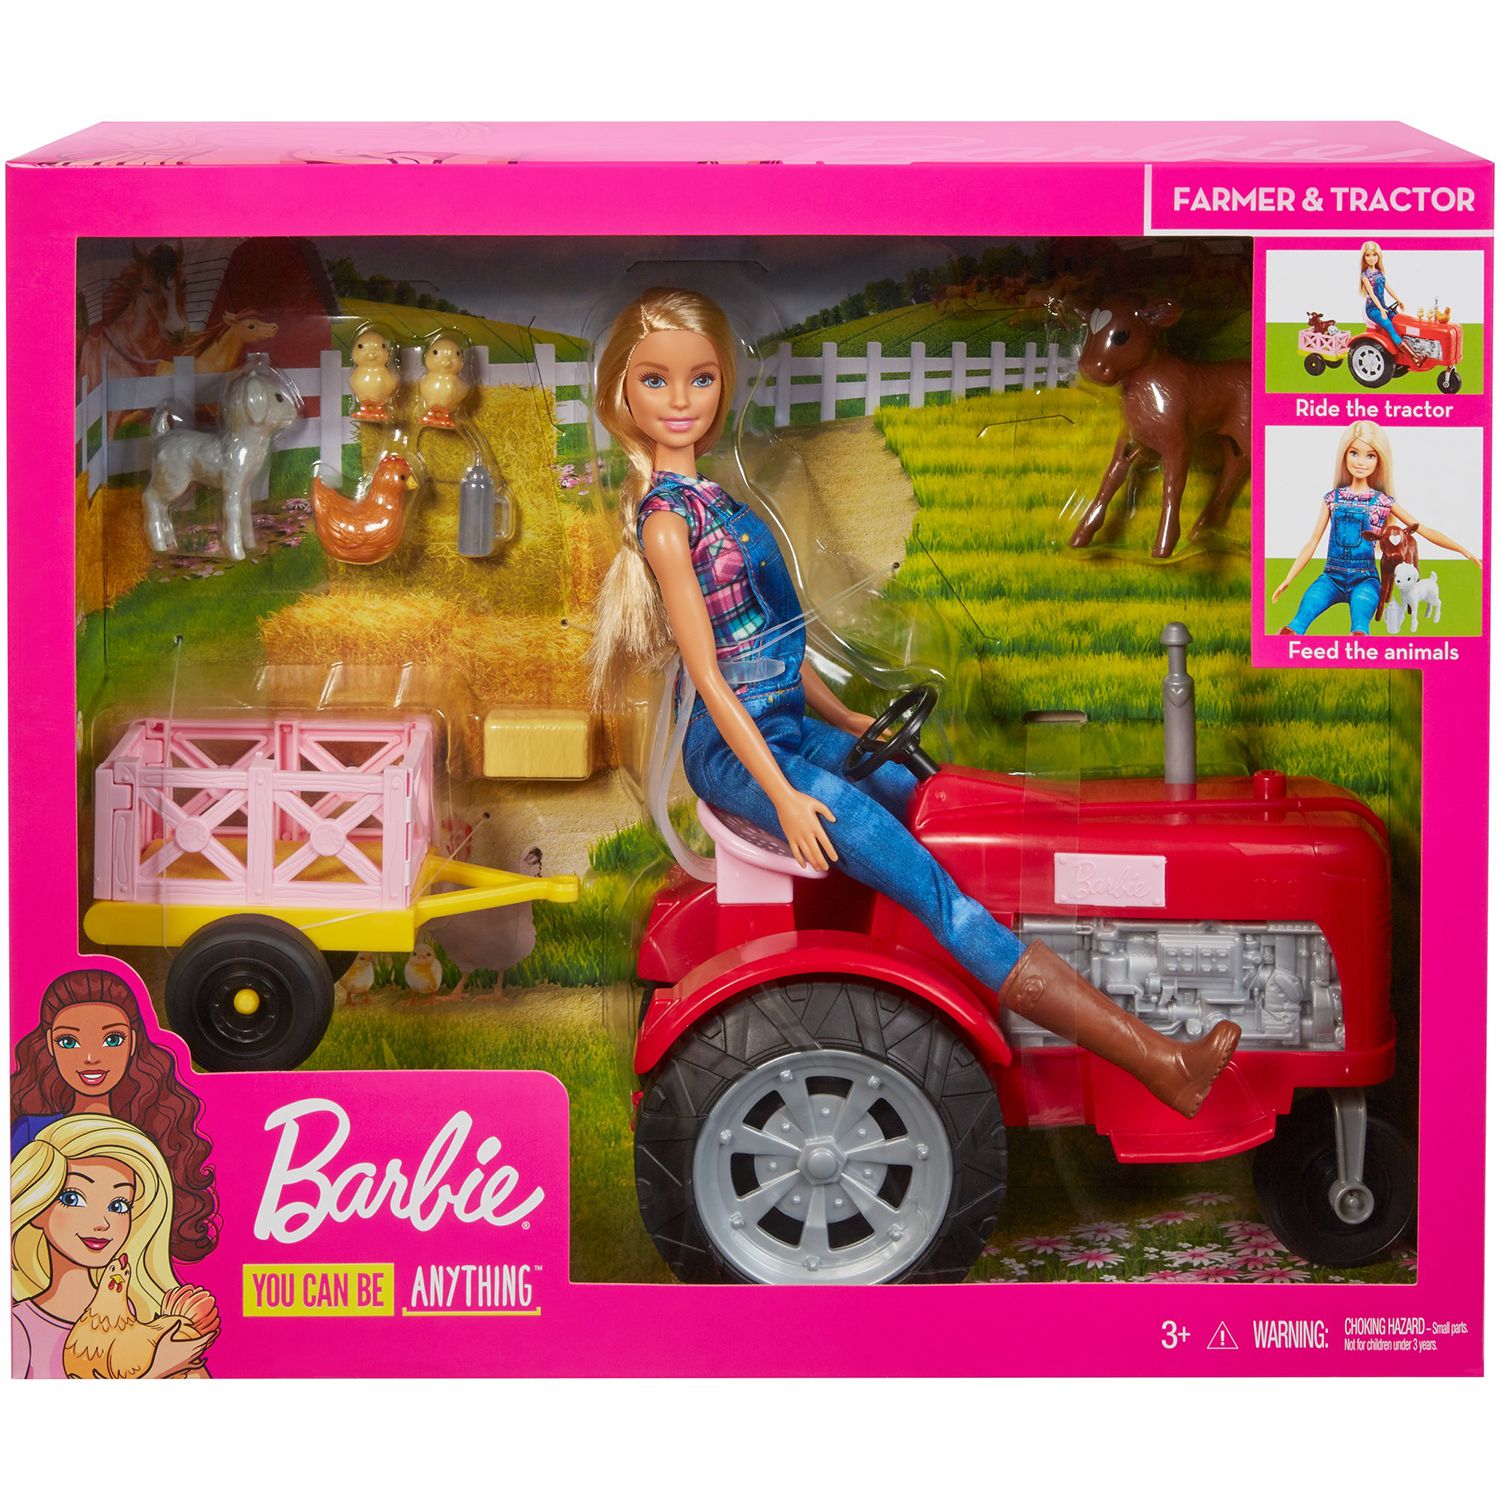 barbie you can be anything chicken farmer